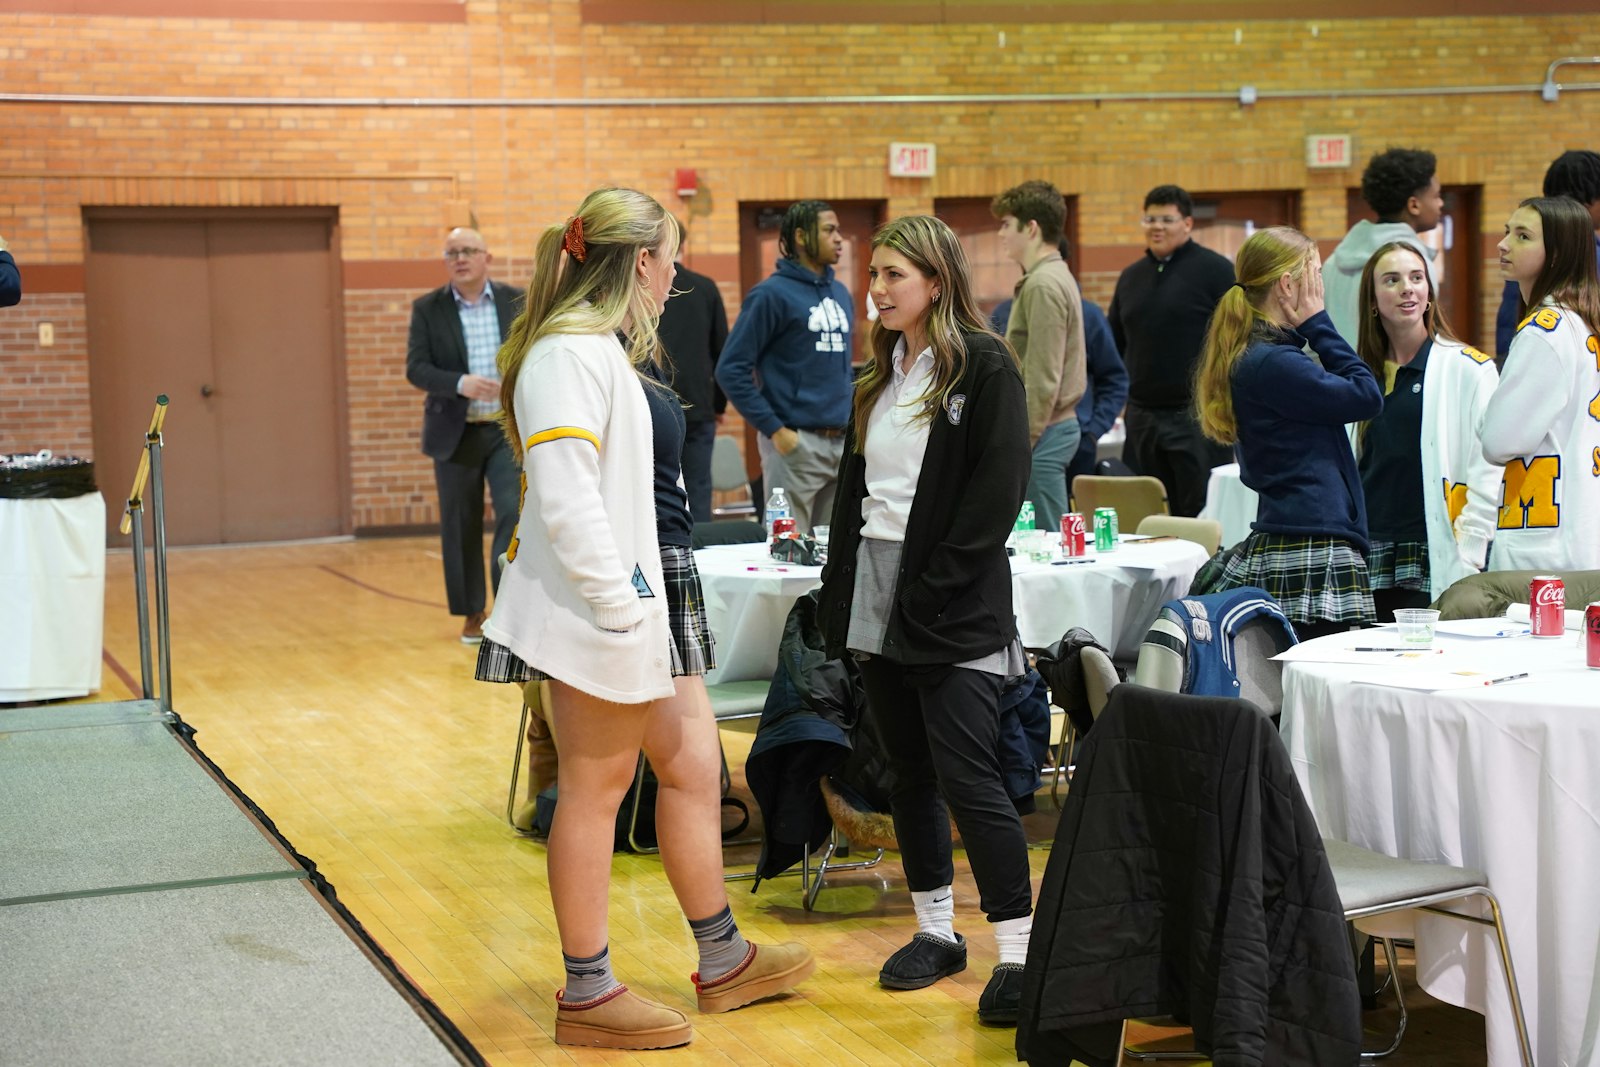 The retreat was a chance for students from across the Catholic League to meet and commune with student-athletes from other schools, sharing their experience of playing at a Christ-based school.